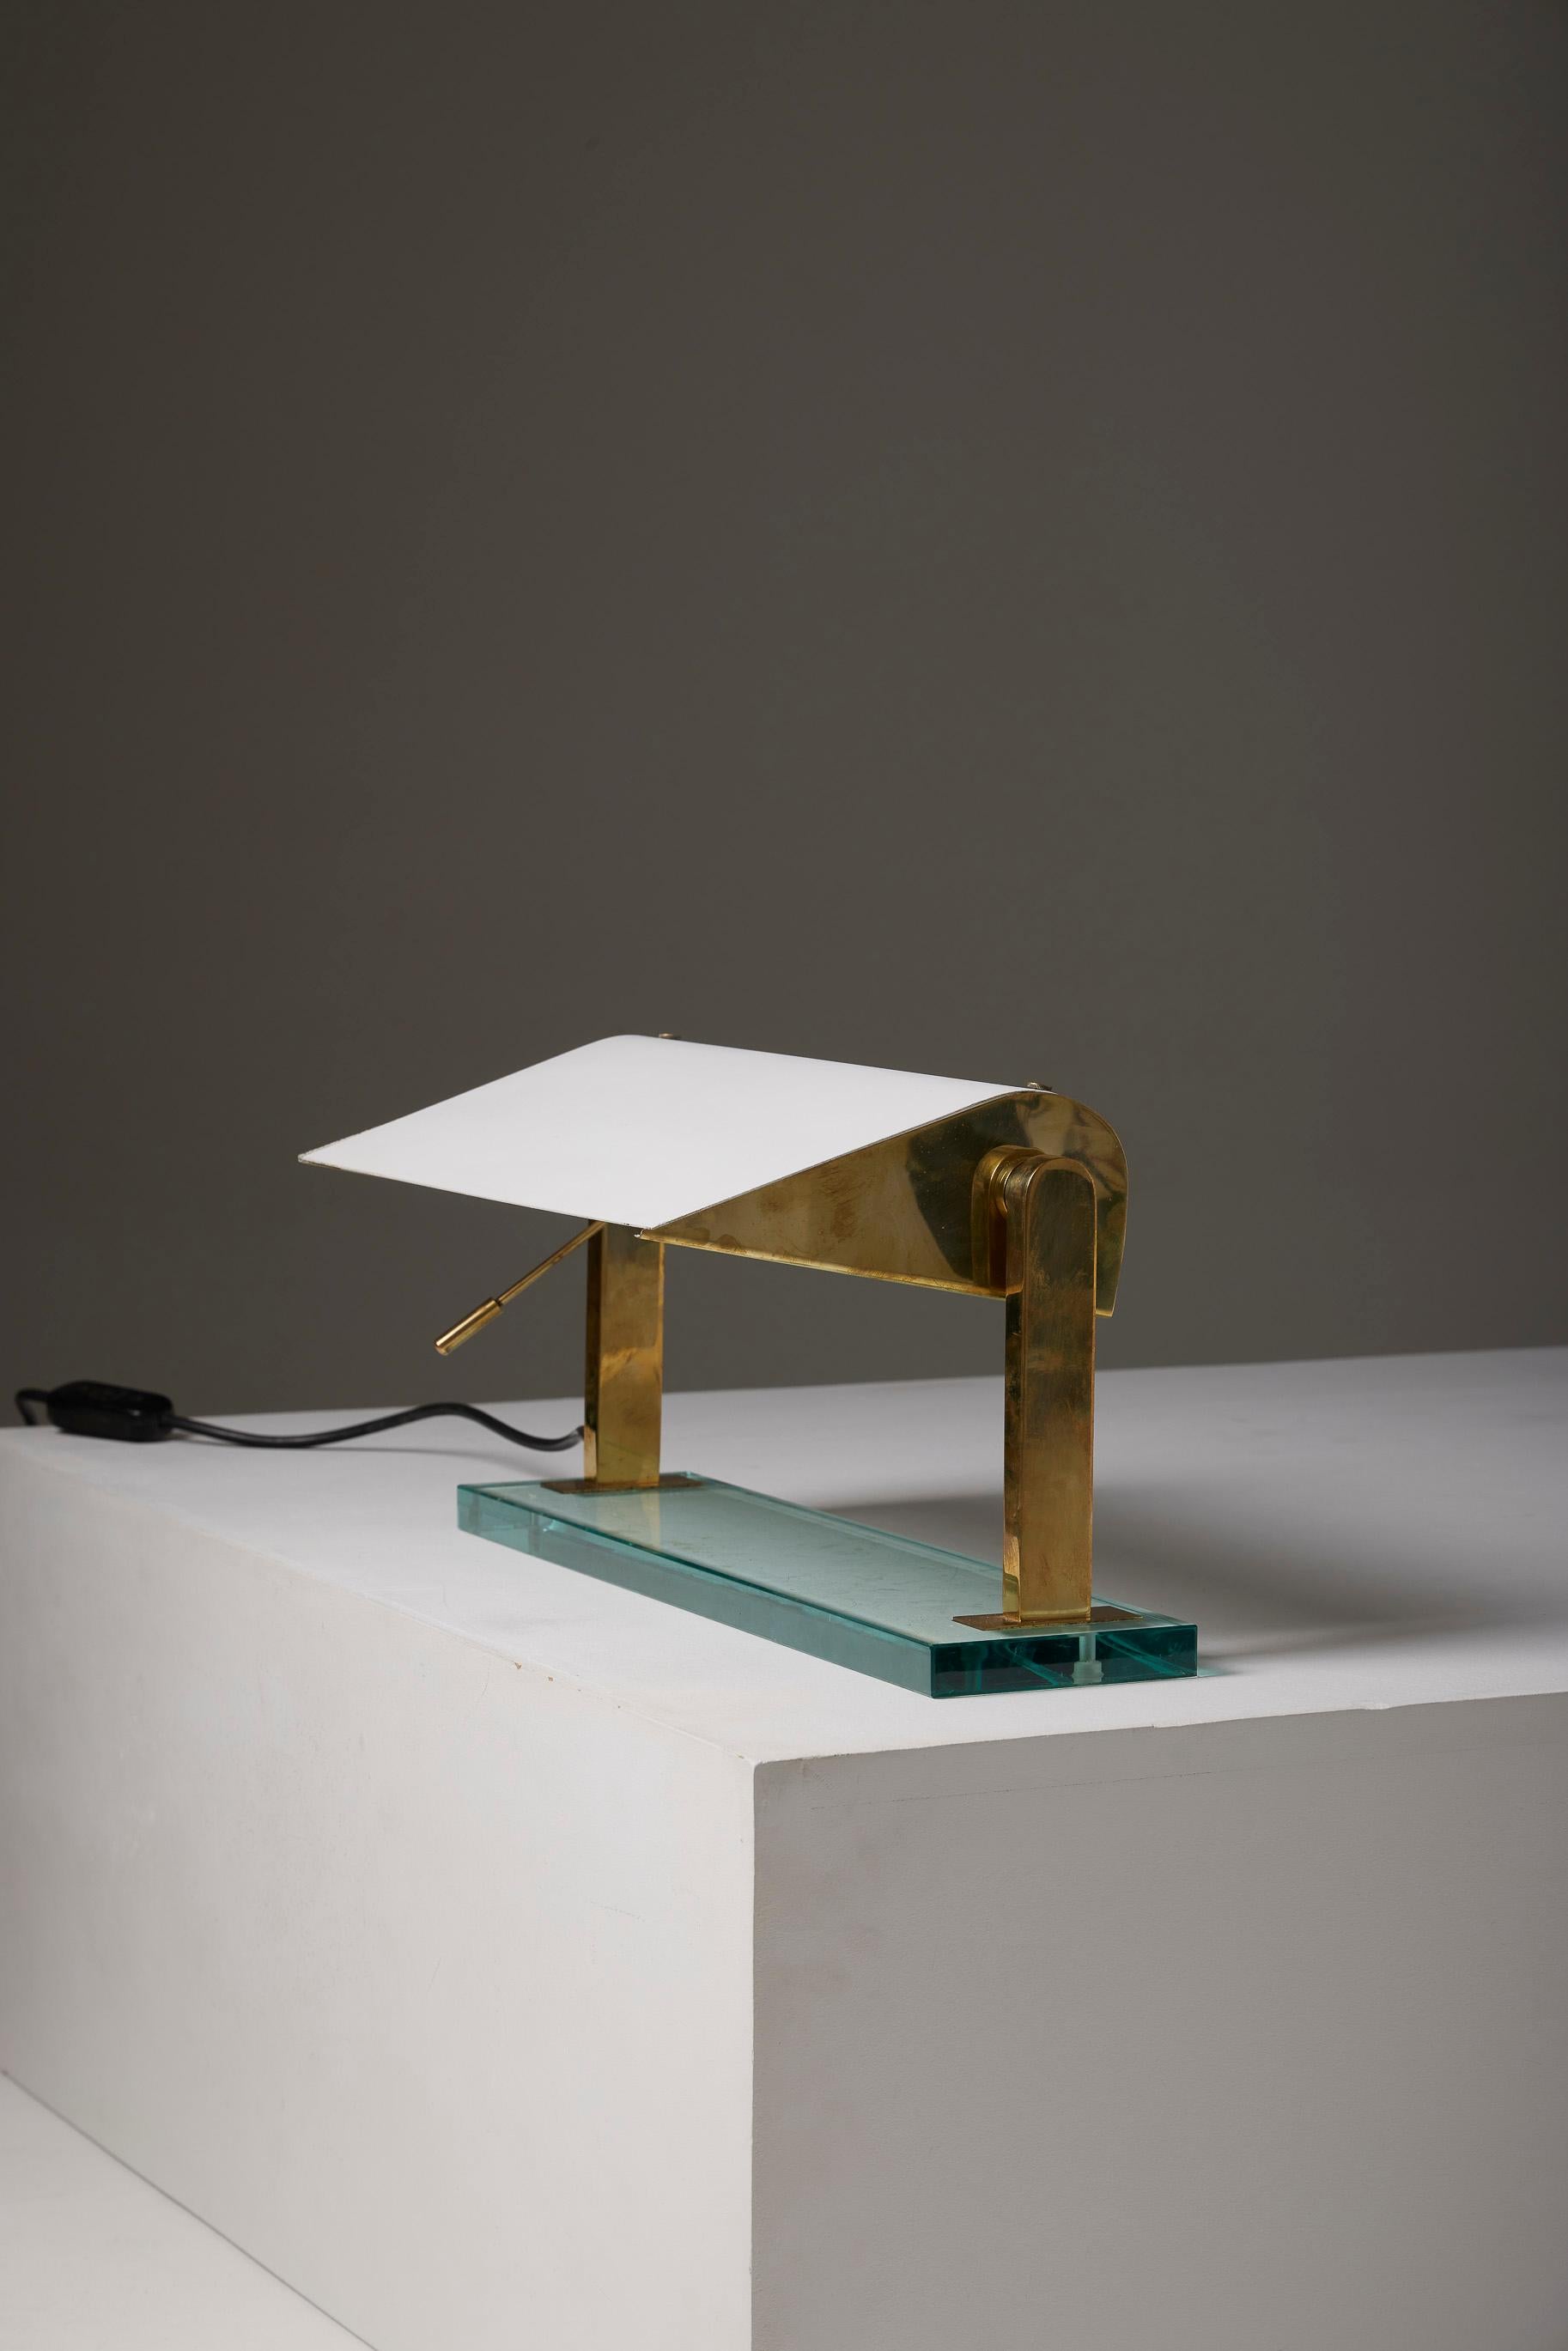 Rare brass and glass table lamp by designer Pietro Chiesa (1892-1948) for Fontana Arte in the 1930s (1939). Brass patinated structure, white glass diffuser, and semi-opaque glass base, typical of Fontana Arte. Very good condition.
LP2933